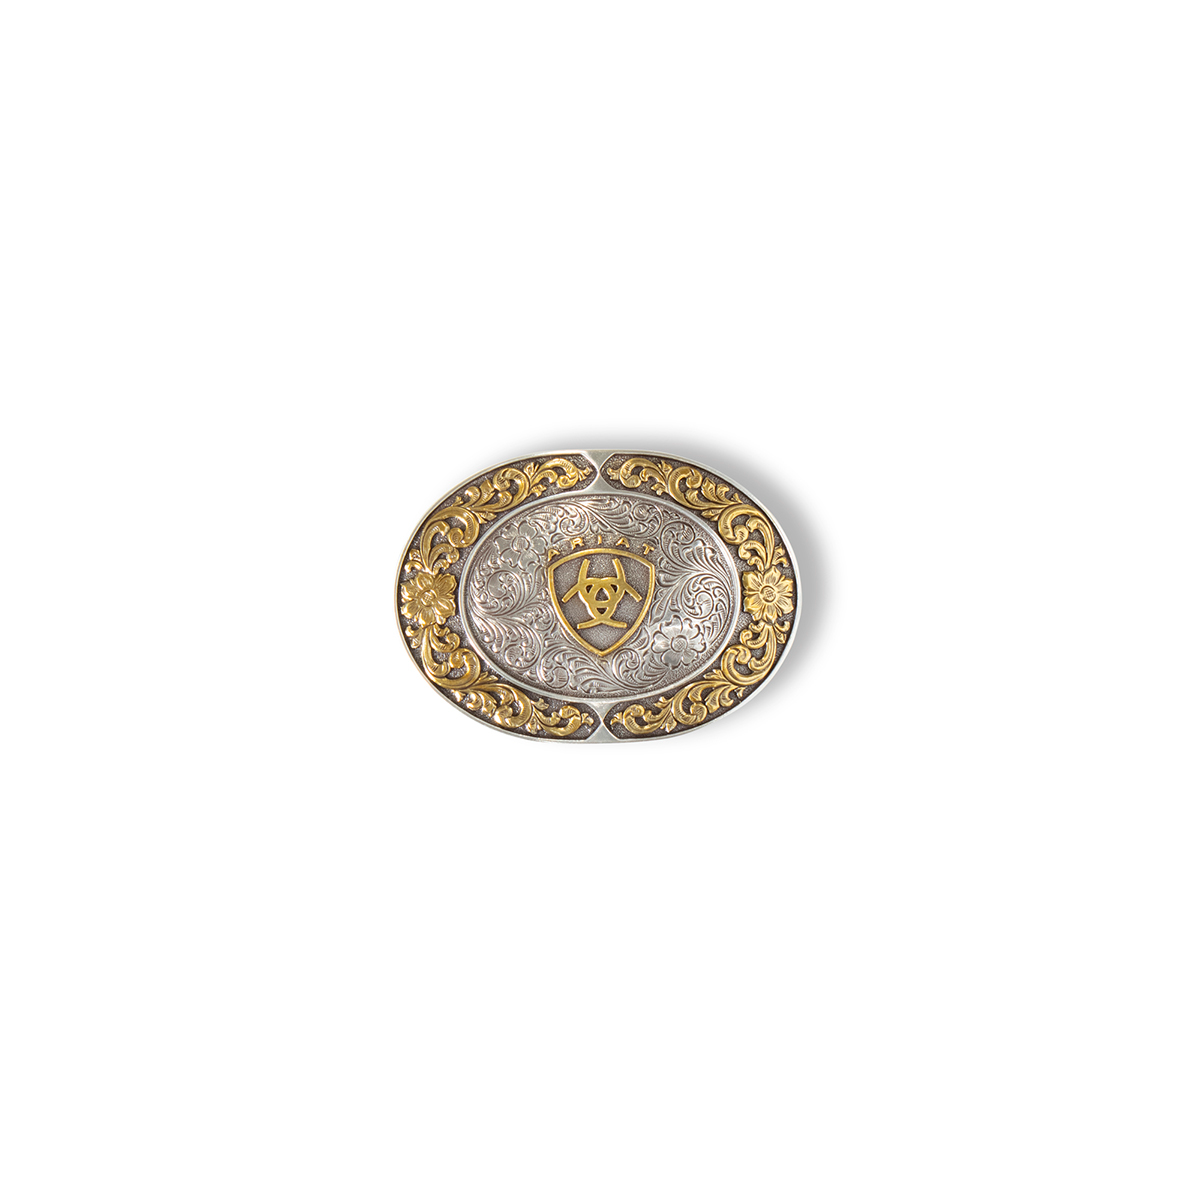 Ariat Oval Buckle - Smooth Edge Floral Emblem